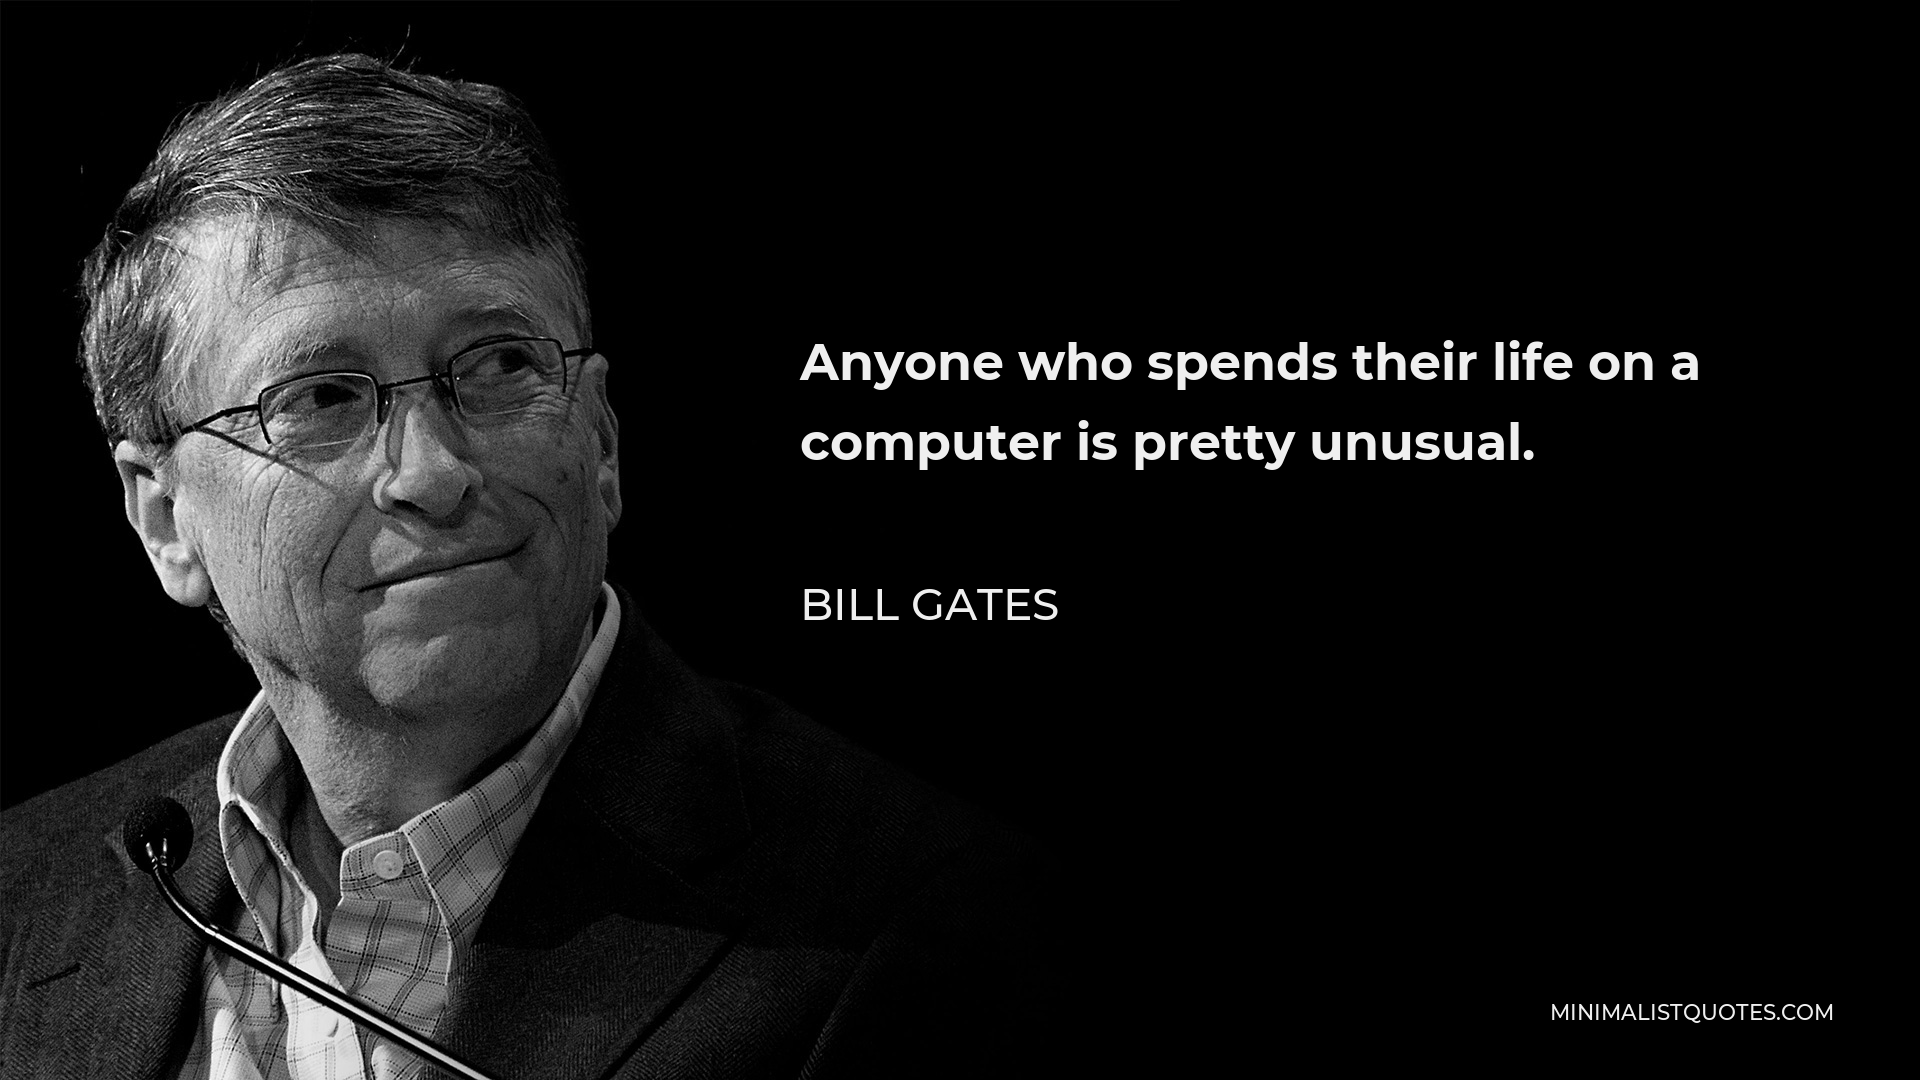 Bill Gates Quote - Anyone who spends their life on a computer is pretty unusual.